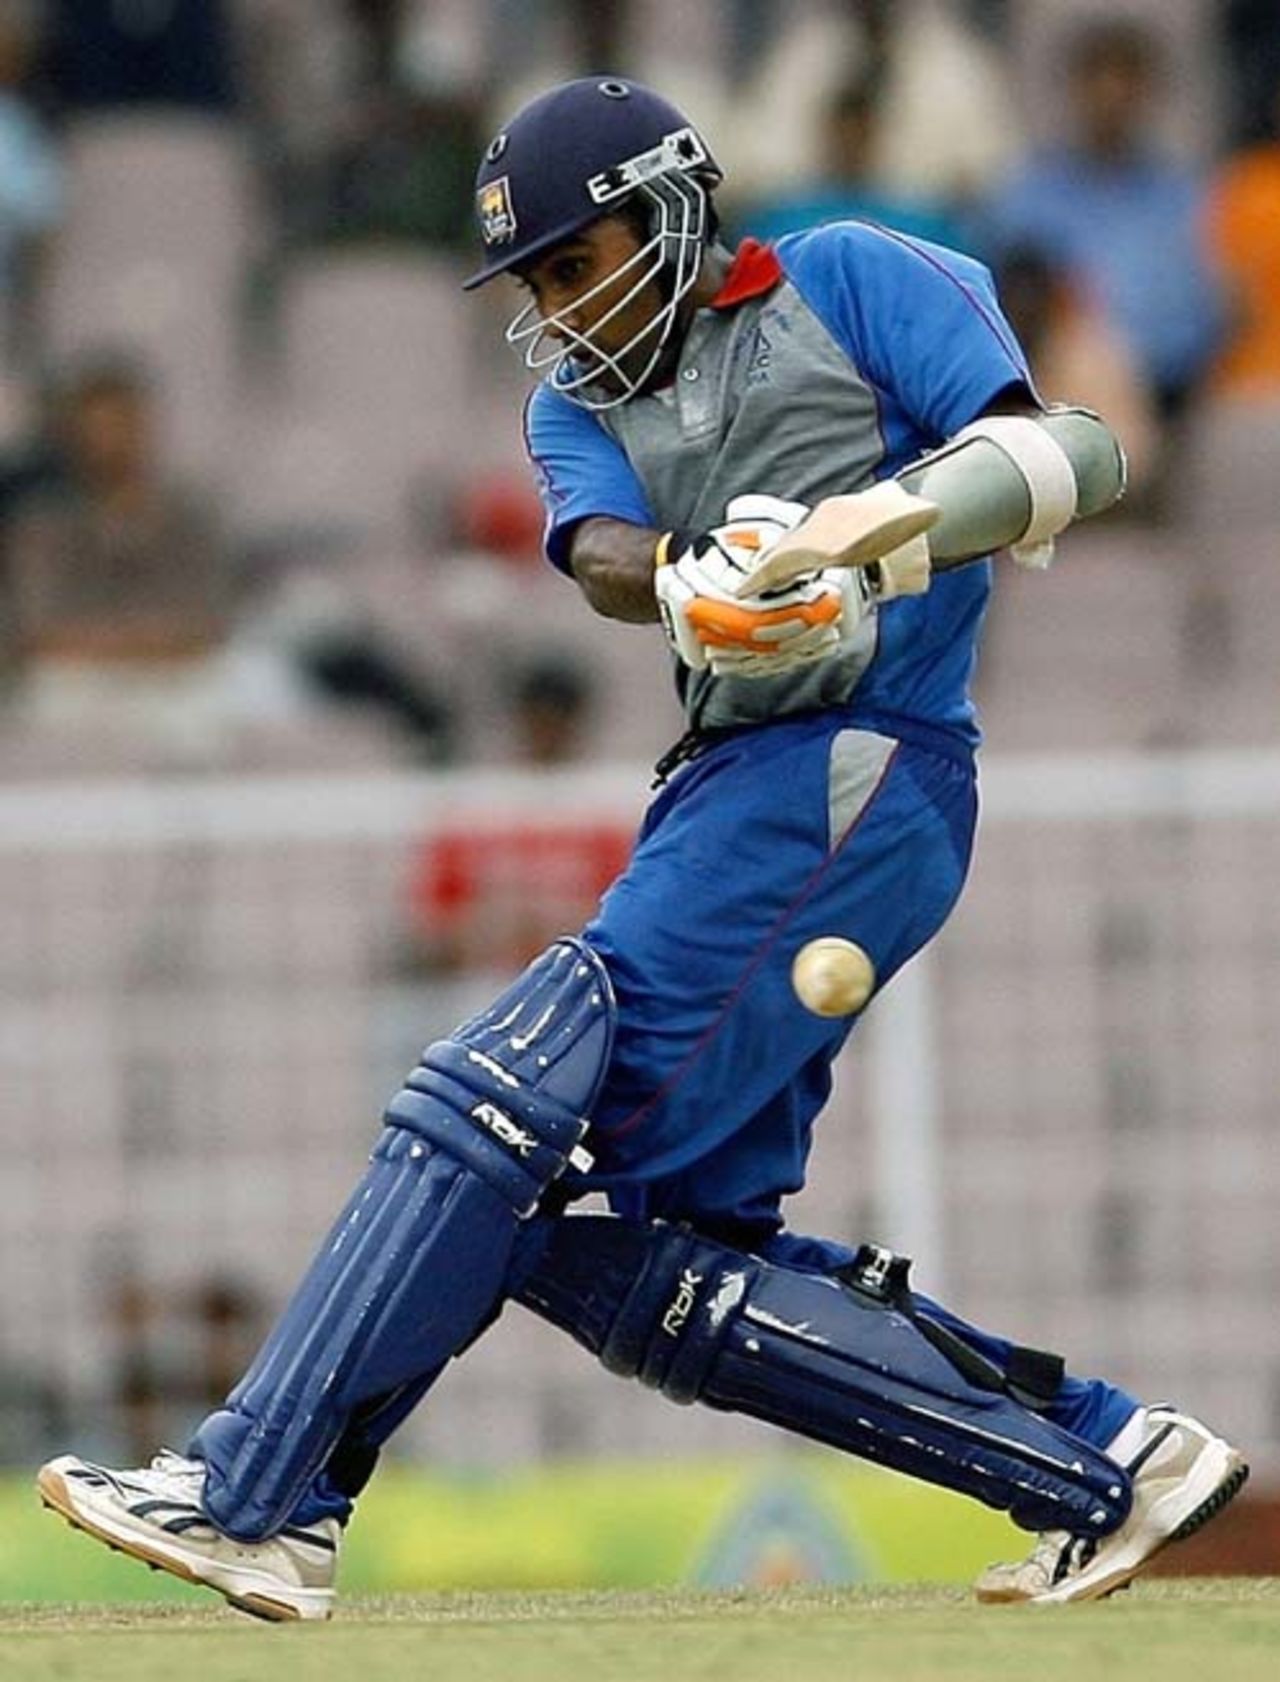  Asia XI skipper Mahela Jayawardene creams one to the square leg boundary during the third ODI of the Afro-Asia cup, Chennai, June 10, 2007